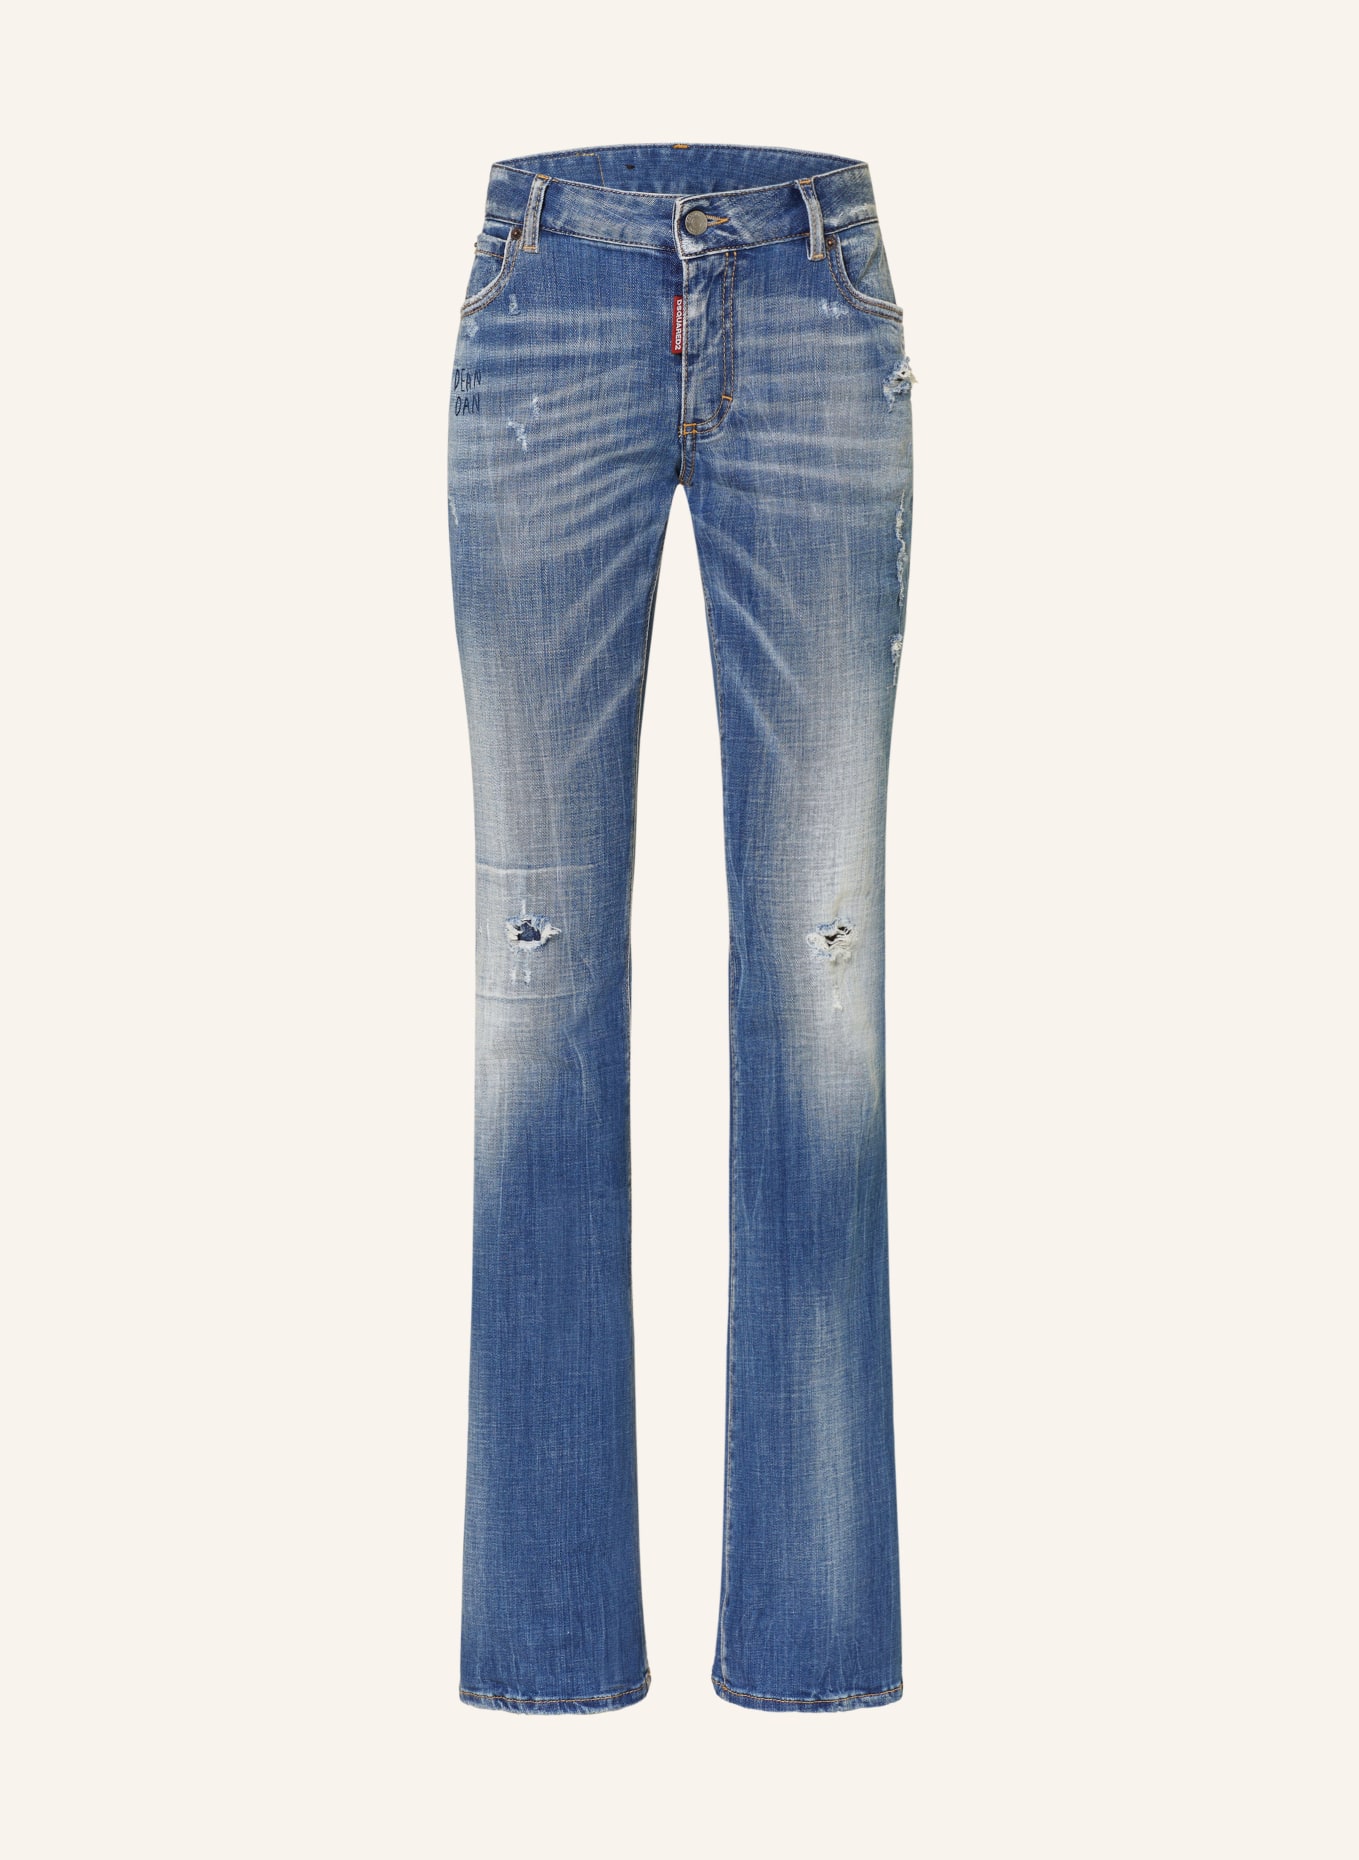 DSQUARED2 Jeans in 470 navy blue